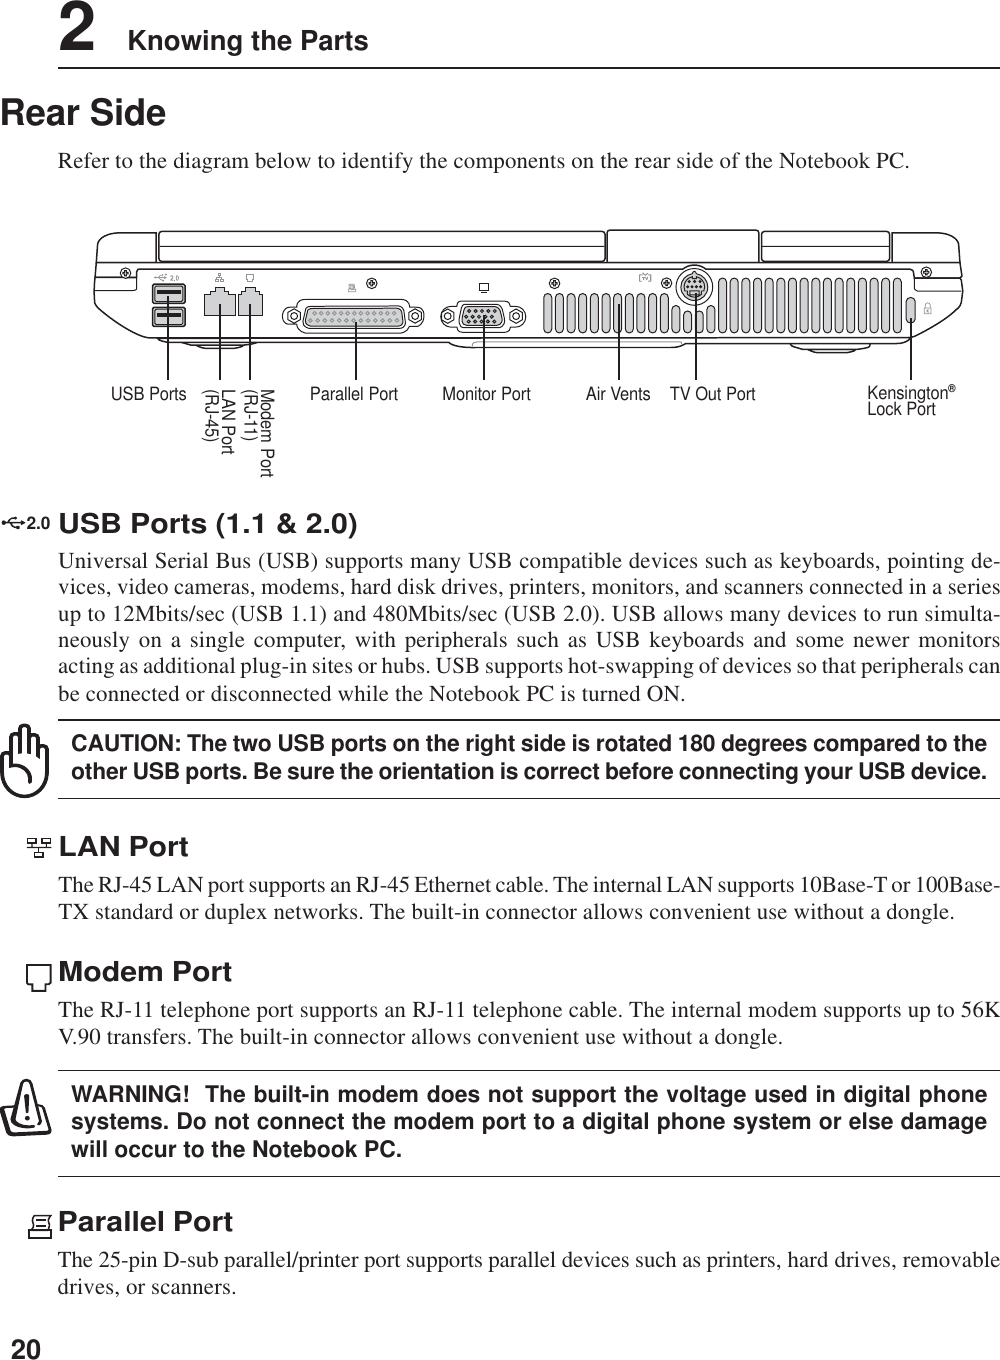 202    Knowing the PartsRear SideRefer to the diagram below to identify the components on the rear side of the Notebook PC.Parallel PortThe 25-pin D-sub parallel/printer port supports parallel devices such as printers, hard drives, removabledrives, or scanners.LAN PortThe RJ-45 LAN port supports an RJ-45 Ethernet cable. The internal LAN supports 10Base-T or 100Base-TX standard or duplex networks. The built-in connector allows convenient use without a dongle.Modem PortThe RJ-11 telephone port supports an RJ-11 telephone cable. The internal modem supports up to 56KV.90 transfers. The built-in connector allows convenient use without a dongle.WARNING!  The built-in modem does not support the voltage used in digital phonesystems. Do not connect the modem port to a digital phone system or else damagewill occur to the Notebook PC.Modem Port(RJ-11)LAN Port(RJ-45)Monitor Port Air VentsUSB Ports Parallel Port Kensington®Lock PortTV Out Port2.0USB Ports (1.1 &amp; 2.0)Universal Serial Bus (USB) supports many USB compatible devices such as keyboards, pointing de-vices, video cameras, modems, hard disk drives, printers, monitors, and scanners connected in a seriesup to 12Mbits/sec (USB 1.1) and 480Mbits/sec (USB 2.0). USB allows many devices to run simulta-neously on a single computer, with peripherals such as USB keyboards and some newer monitorsacting as additional plug-in sites or hubs. USB supports hot-swapping of devices so that peripherals canbe connected or disconnected while the Notebook PC is turned ON.CAUTION: The two USB ports on the right side is rotated 180 degrees compared to theother USB ports. Be sure the orientation is correct before connecting your USB device.